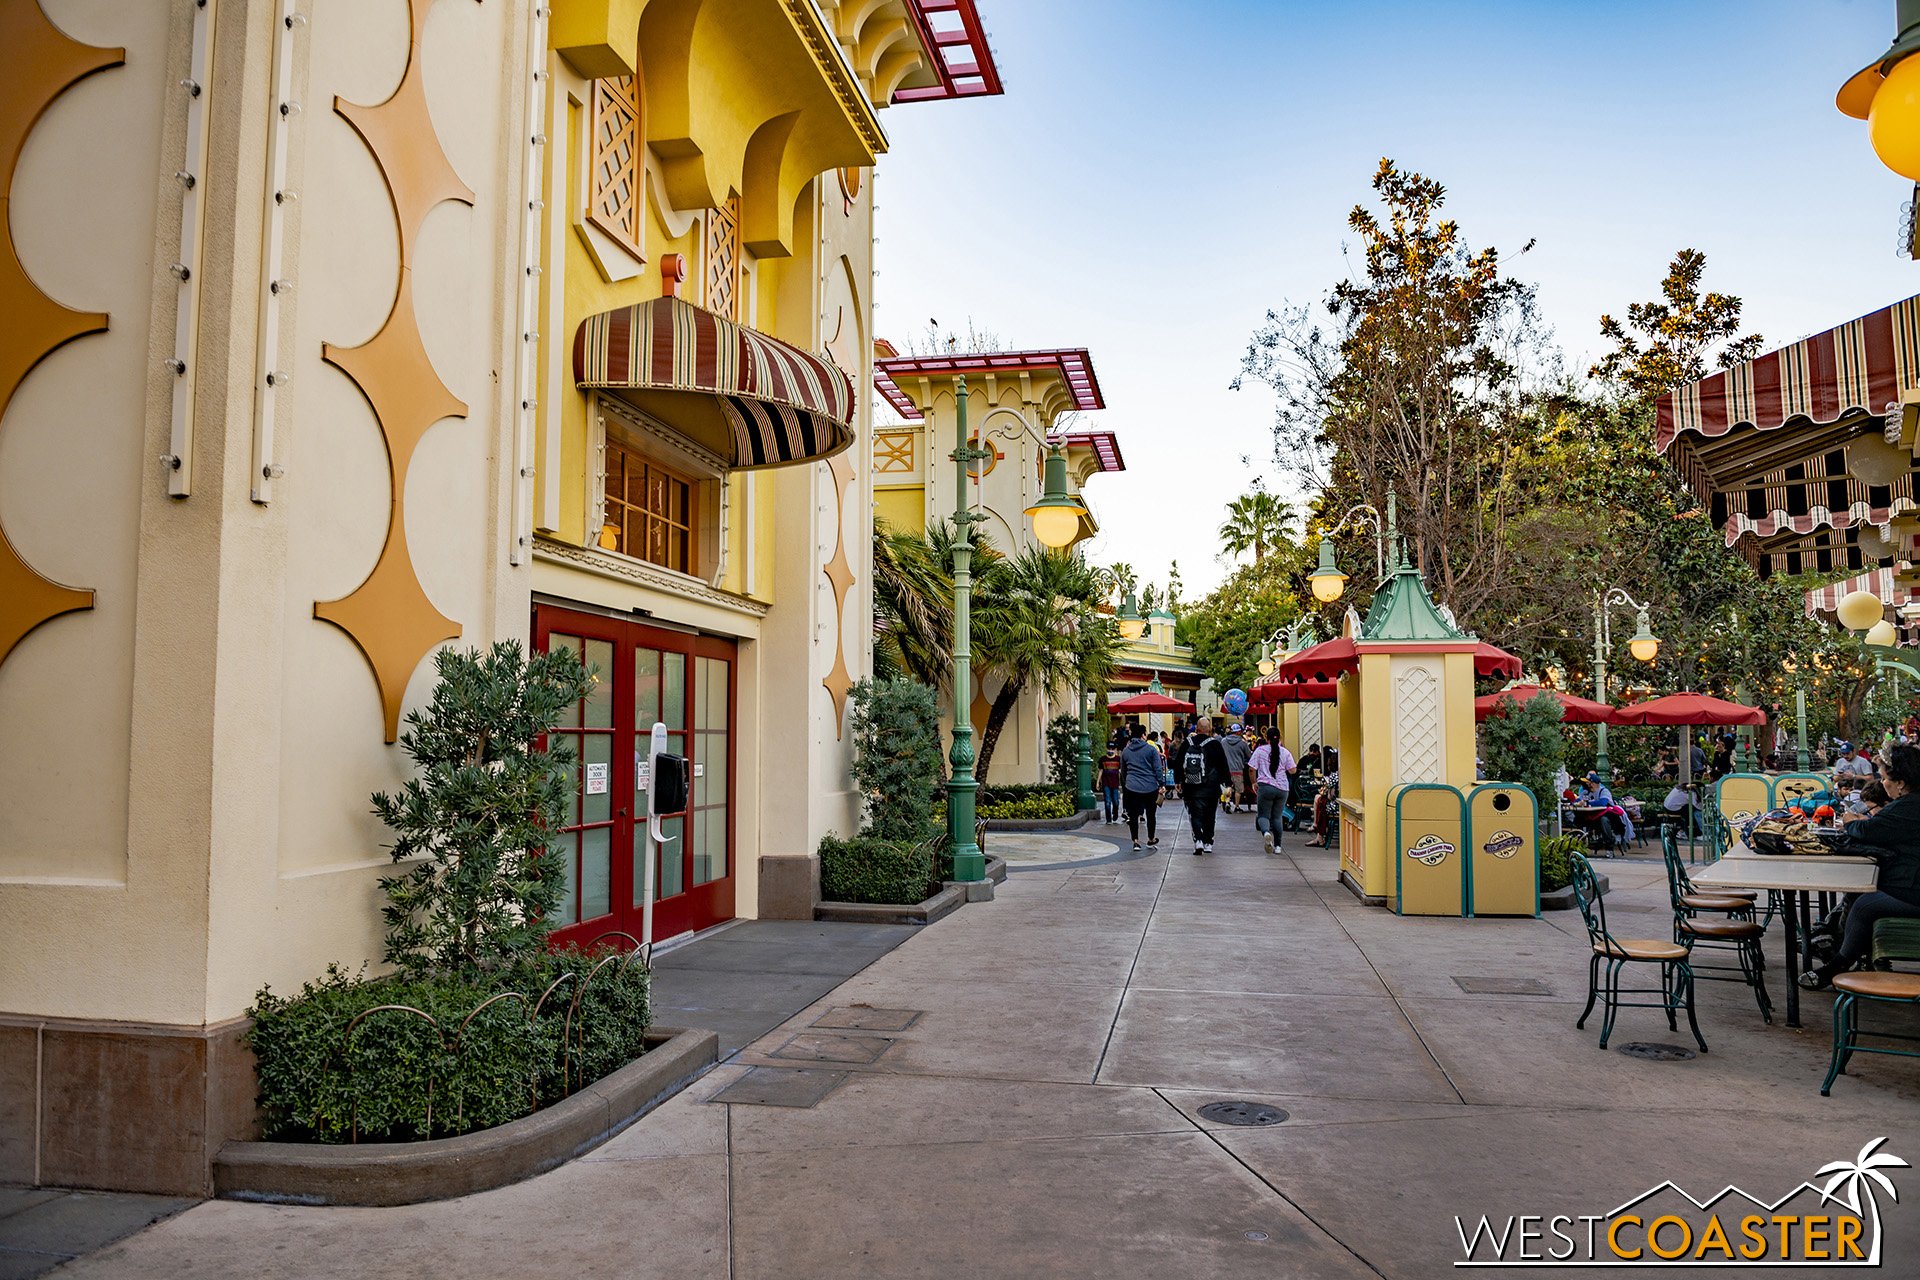  The Paradise Garden Grill line was also much shorter, no longer stretching to the entrance of the Boardwalk Restaurants area. 